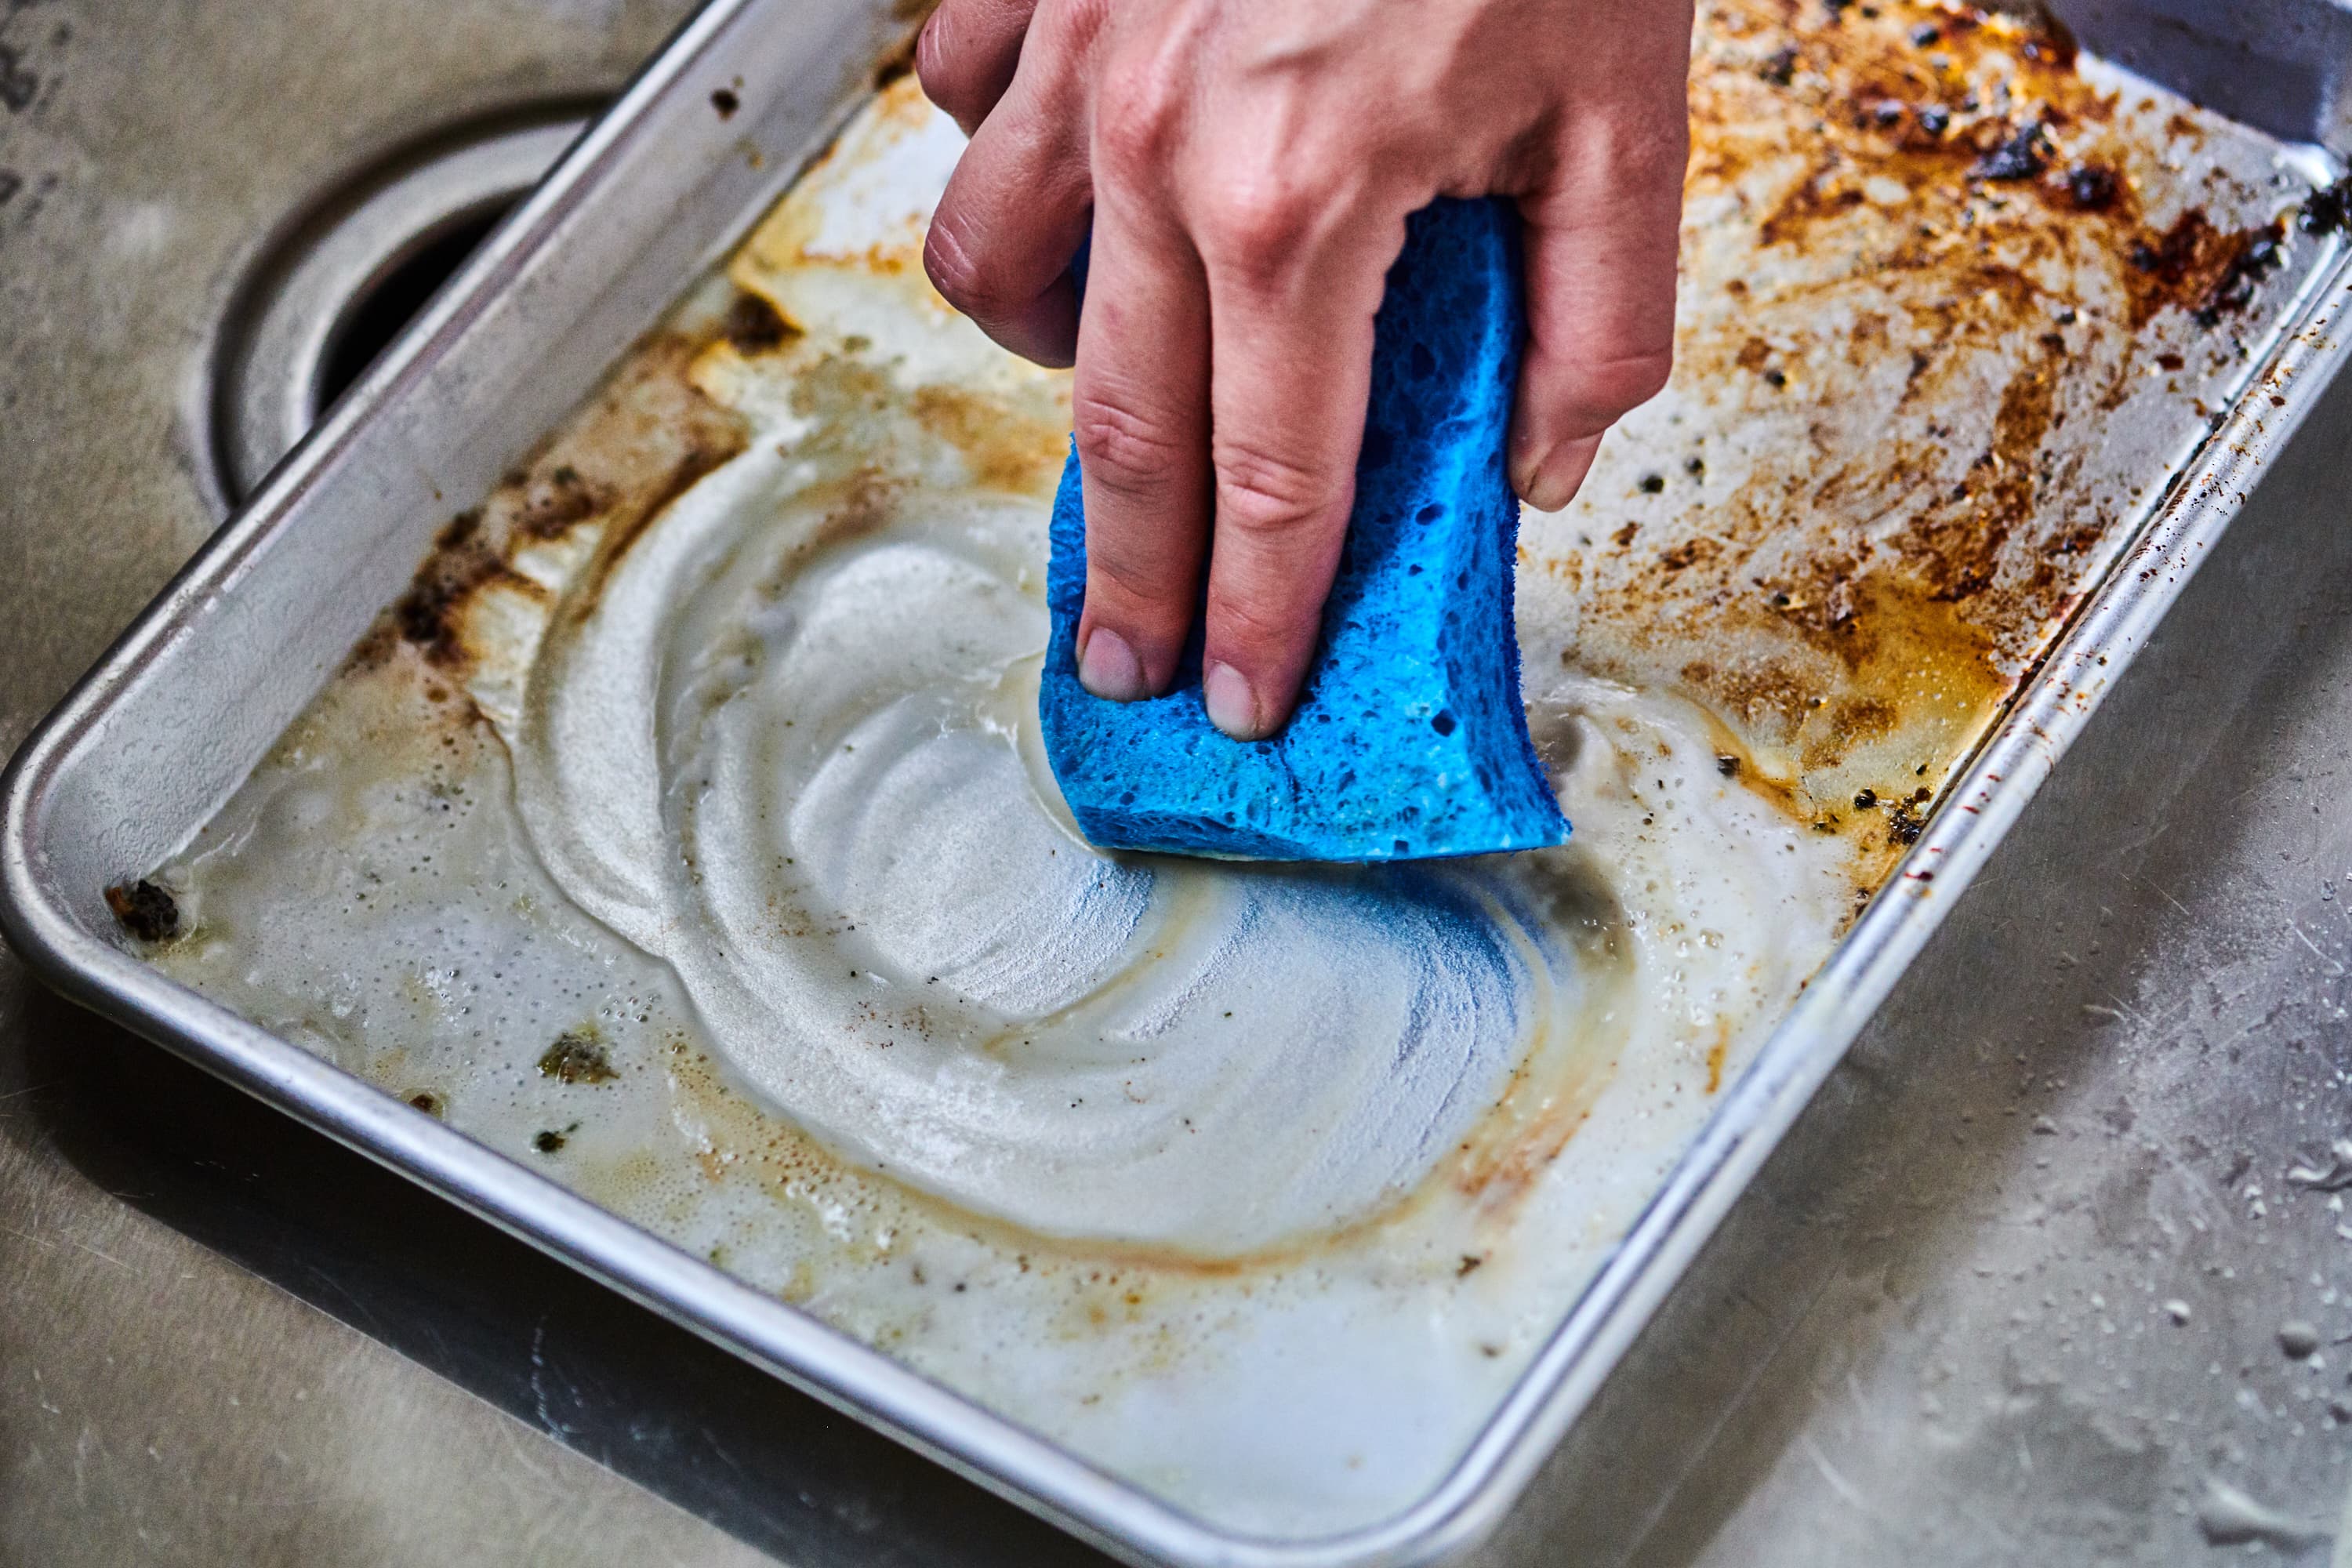 https://cdn.apartmenttherapy.info/image/upload/v1589925314/k/Photo/Lifestyle/2020-05-Cleaning-Battle-Baking-Sheets/Cleaning-Skills-Battle_Sheet-Pan675-BS-HP.jpg